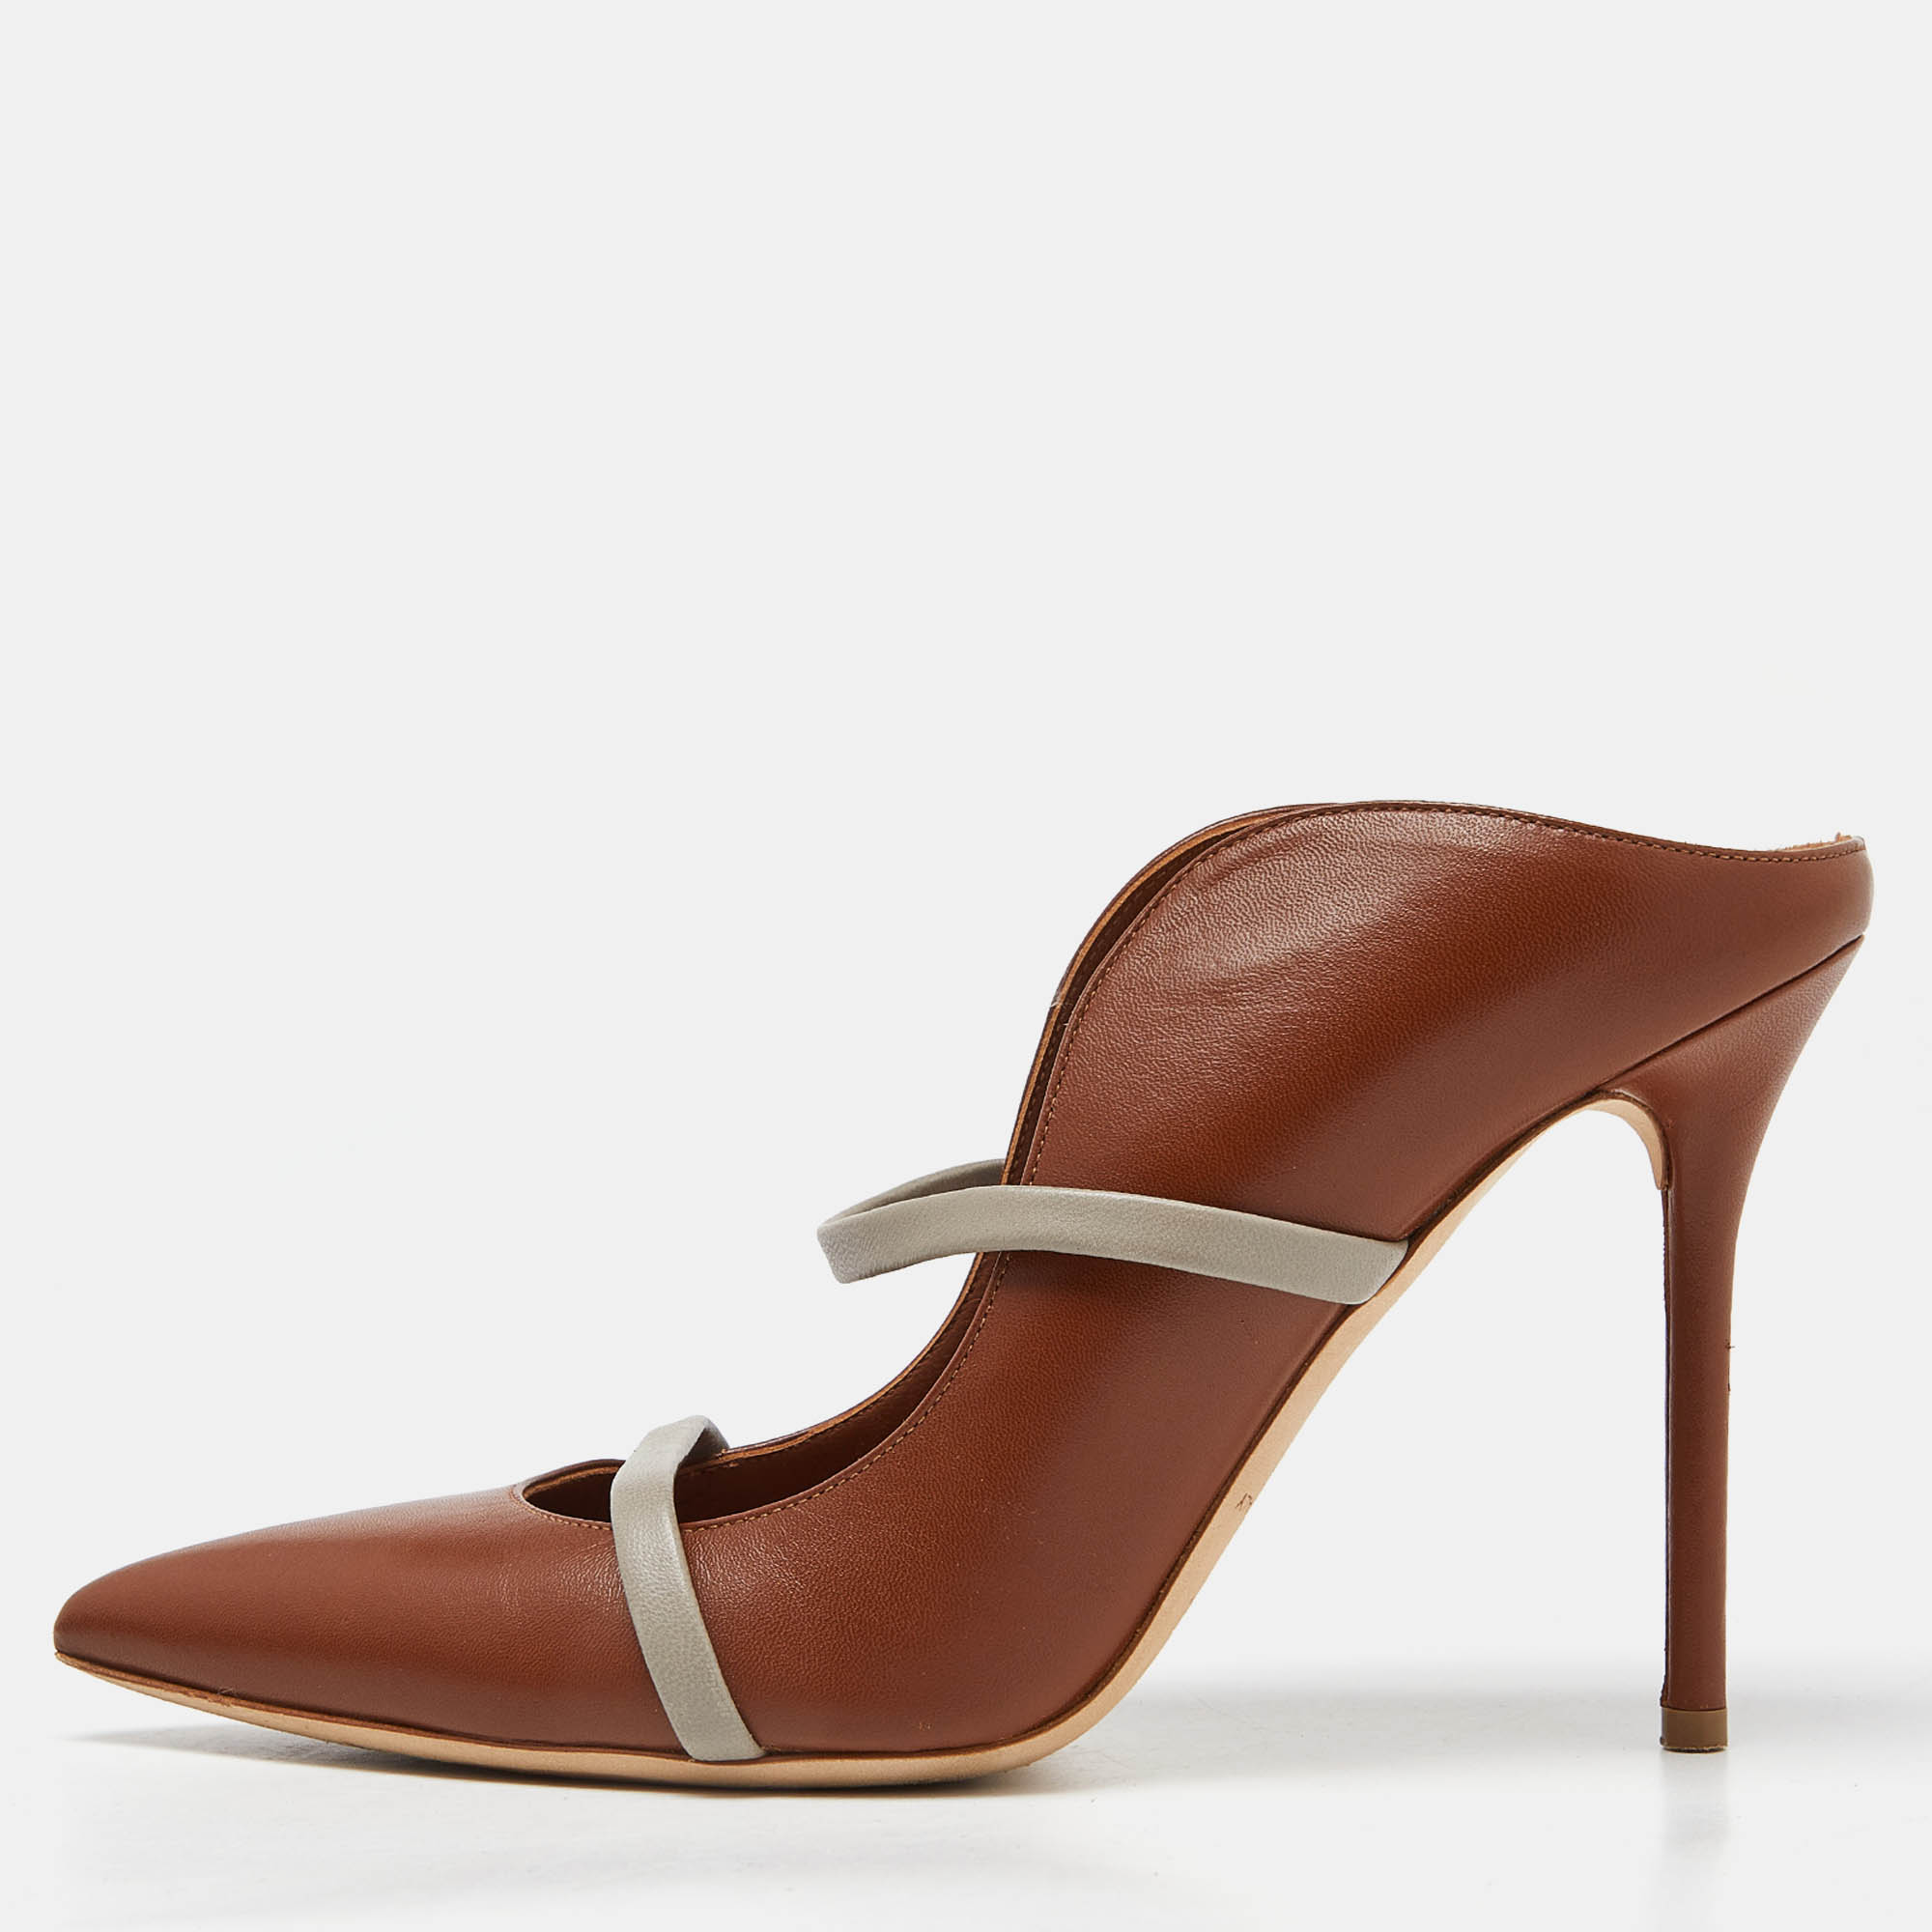 Admired for its waved silhouette these Malone Souliers mules will make sure the spotlight follows you everywhere. The strap detailing across the brown upper enhances its contemporary shape. Created from leather they are complete with a slip on fitting.